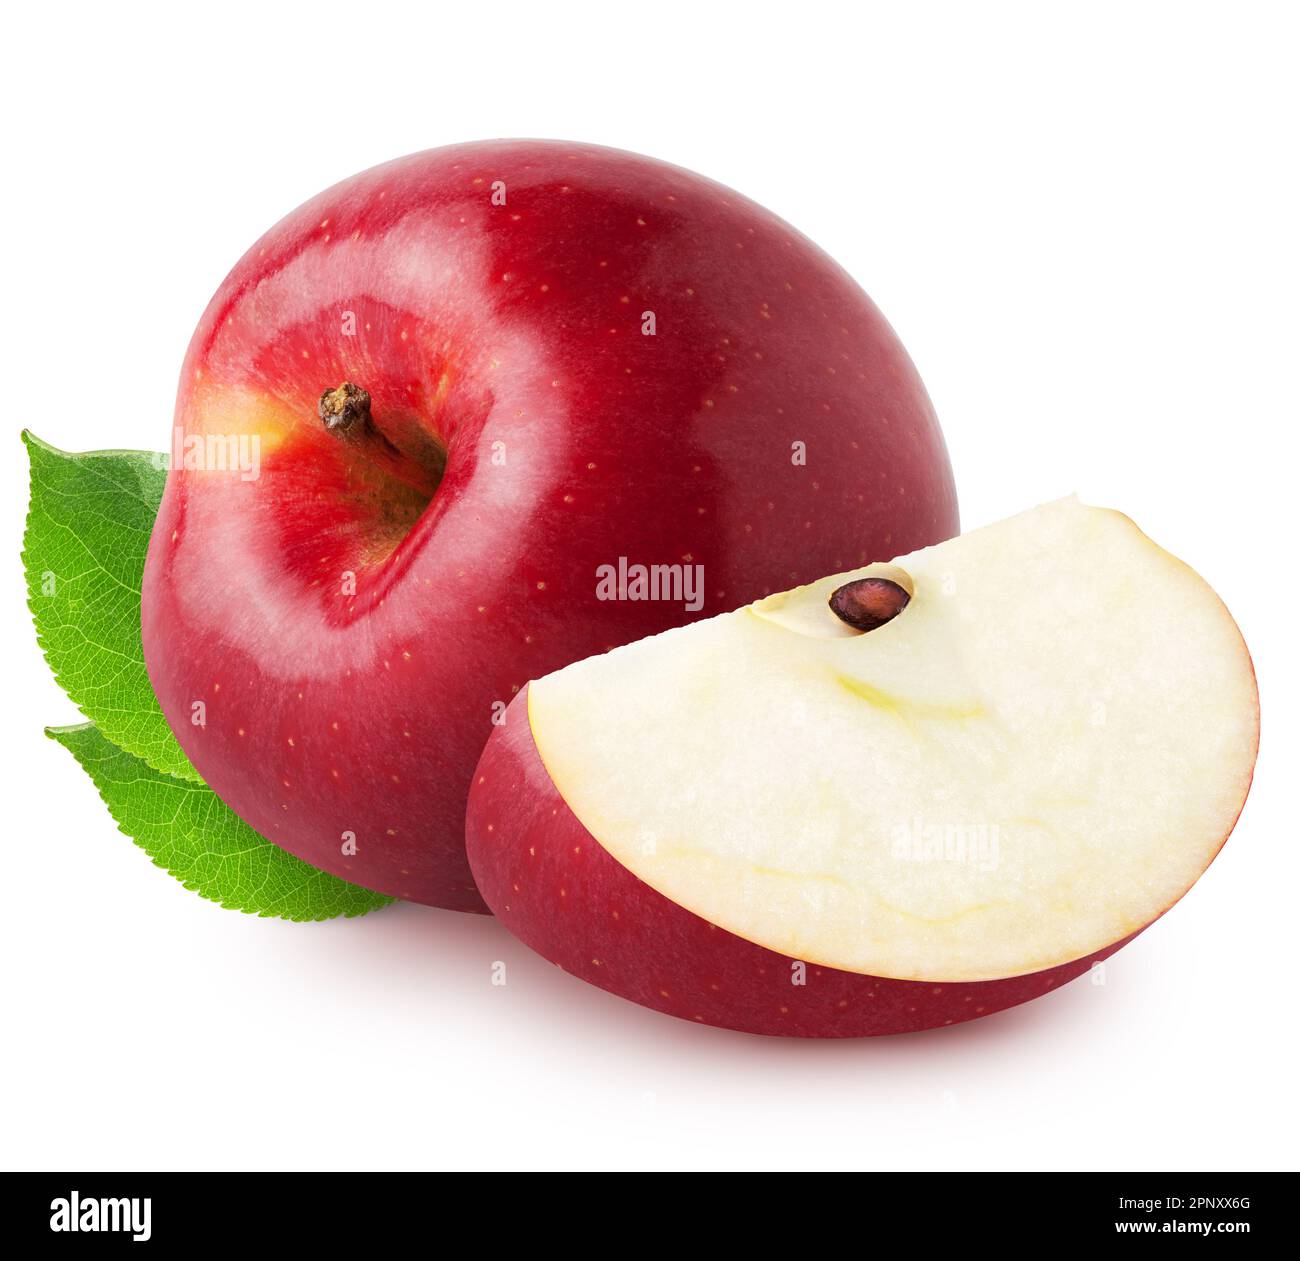 https://c8.alamy.com/comp/2PNXX6G/isolated-apples-whole-red-pink-apple-fruit-with-slice-isolated-on-white-with-clipping-path-2PNXX6G.jpg